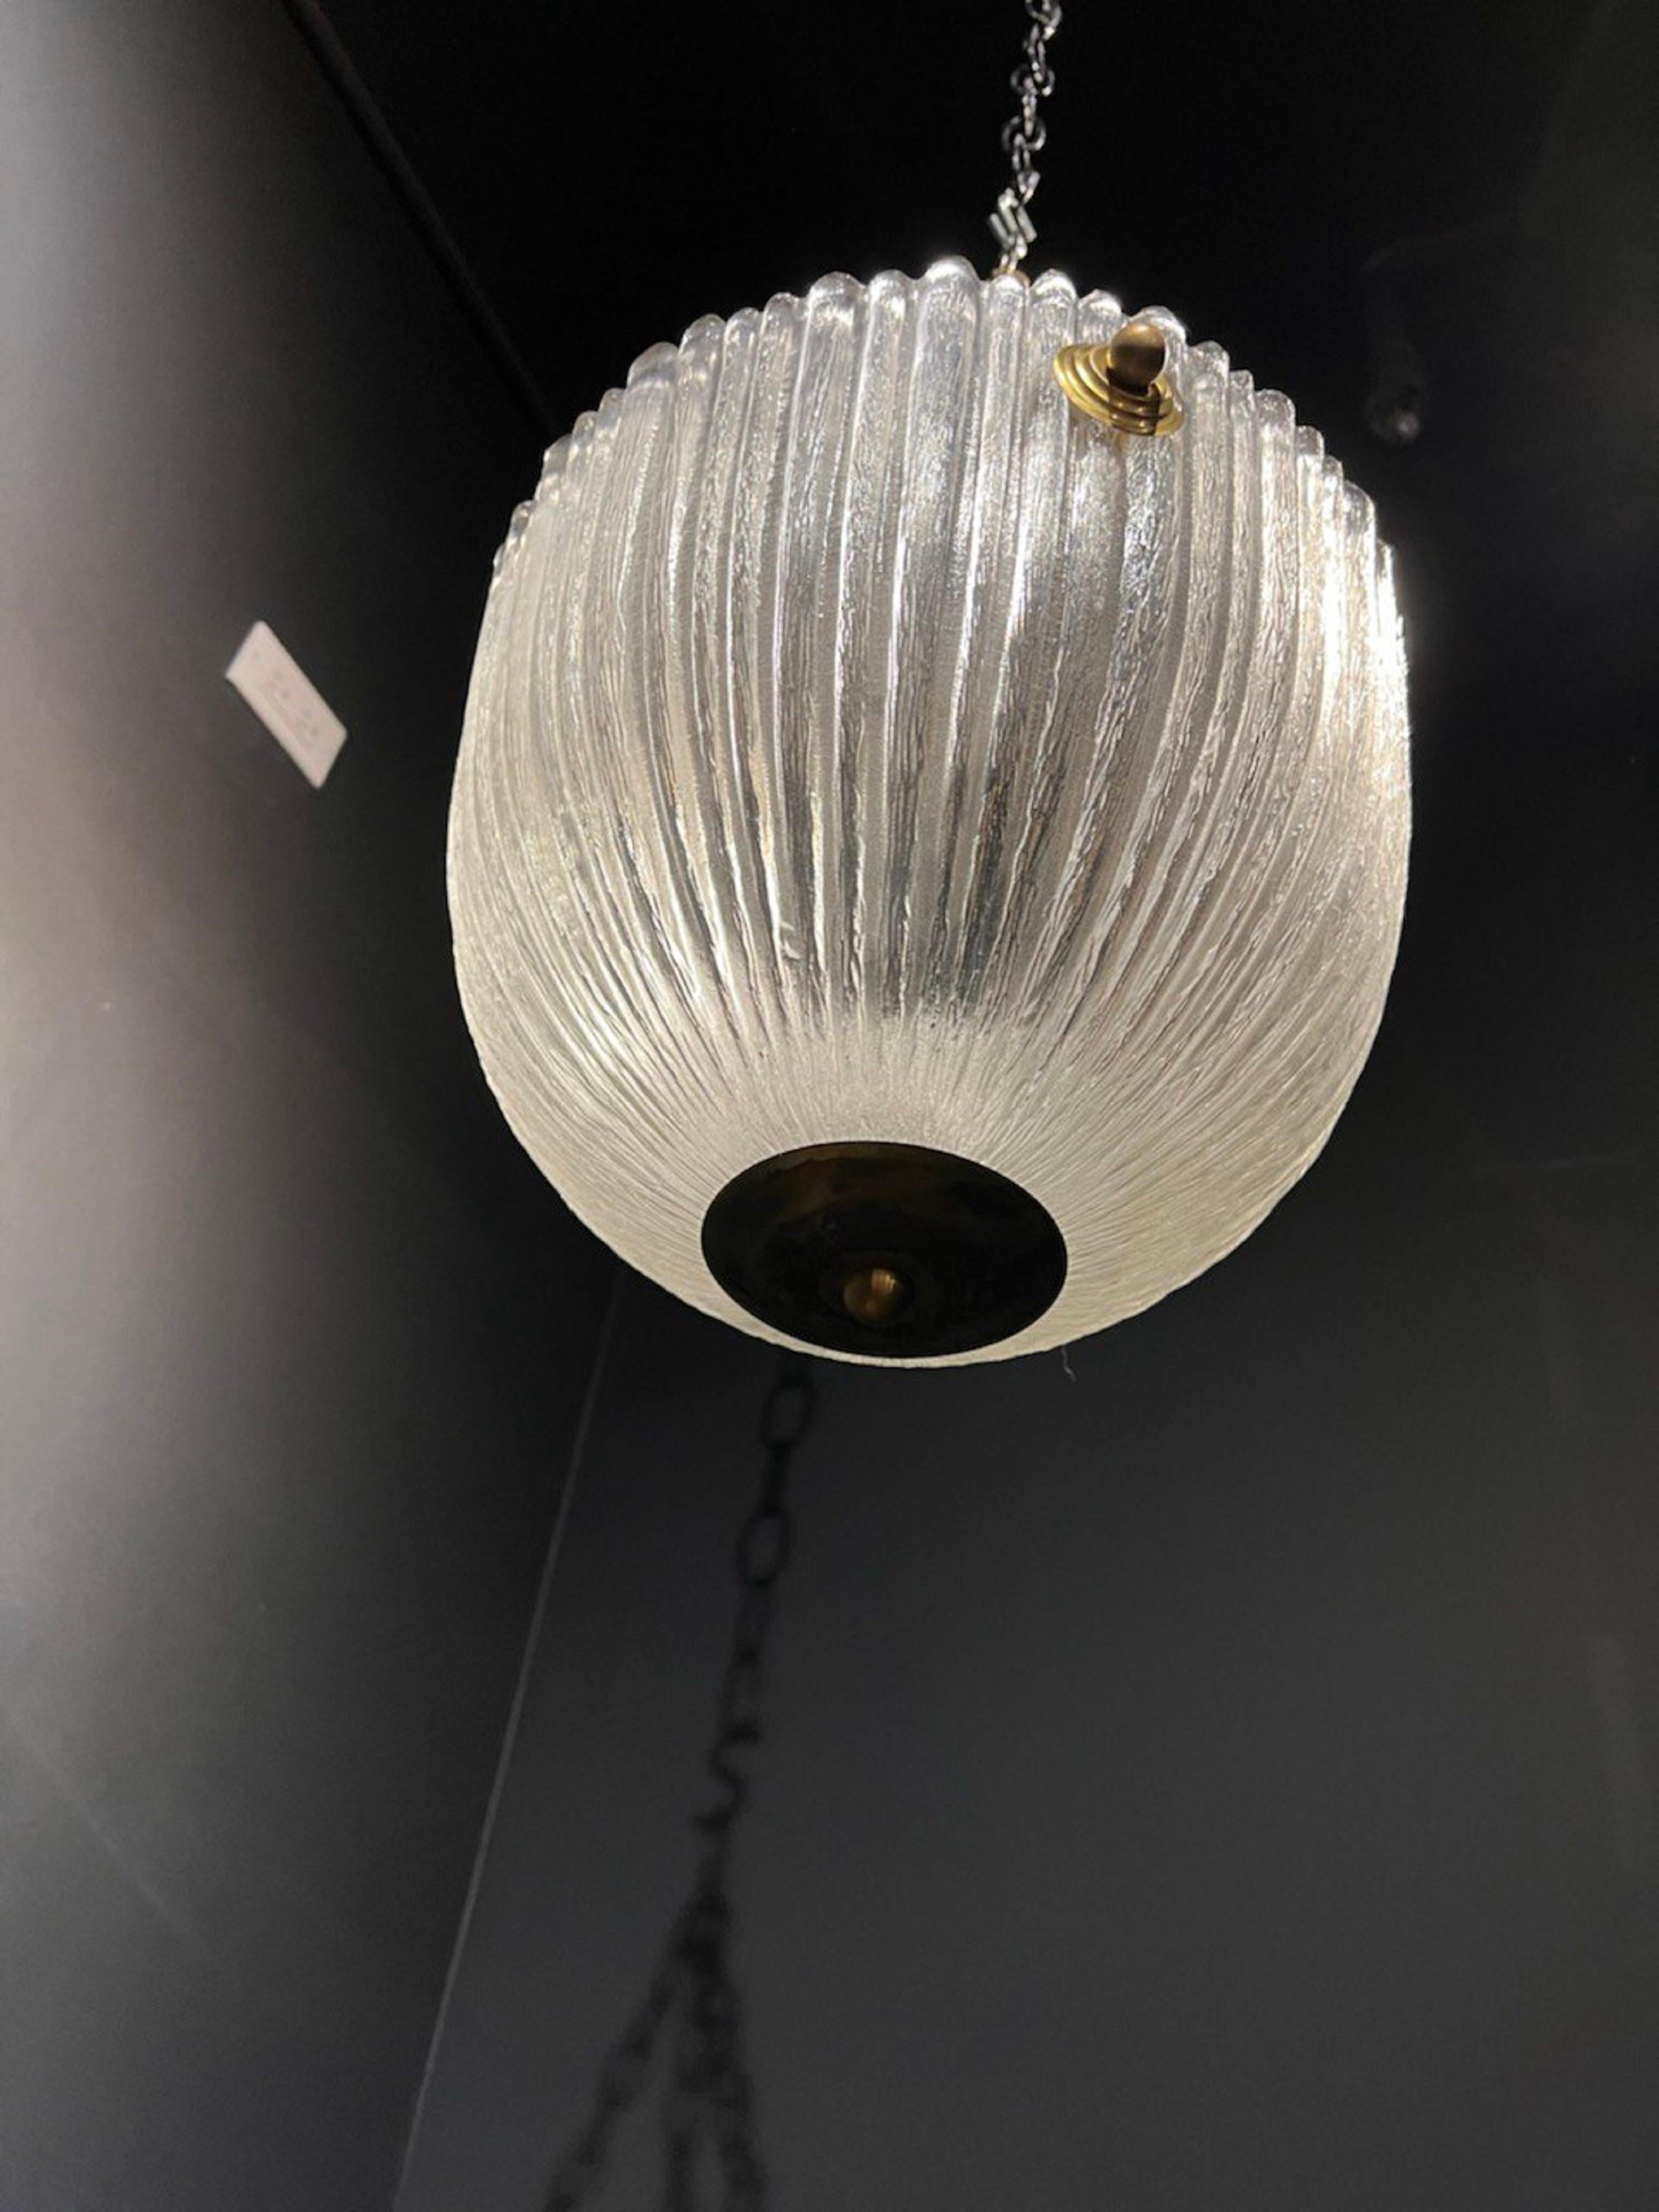 A circa 1930 French molded glass light fixture with interior lights